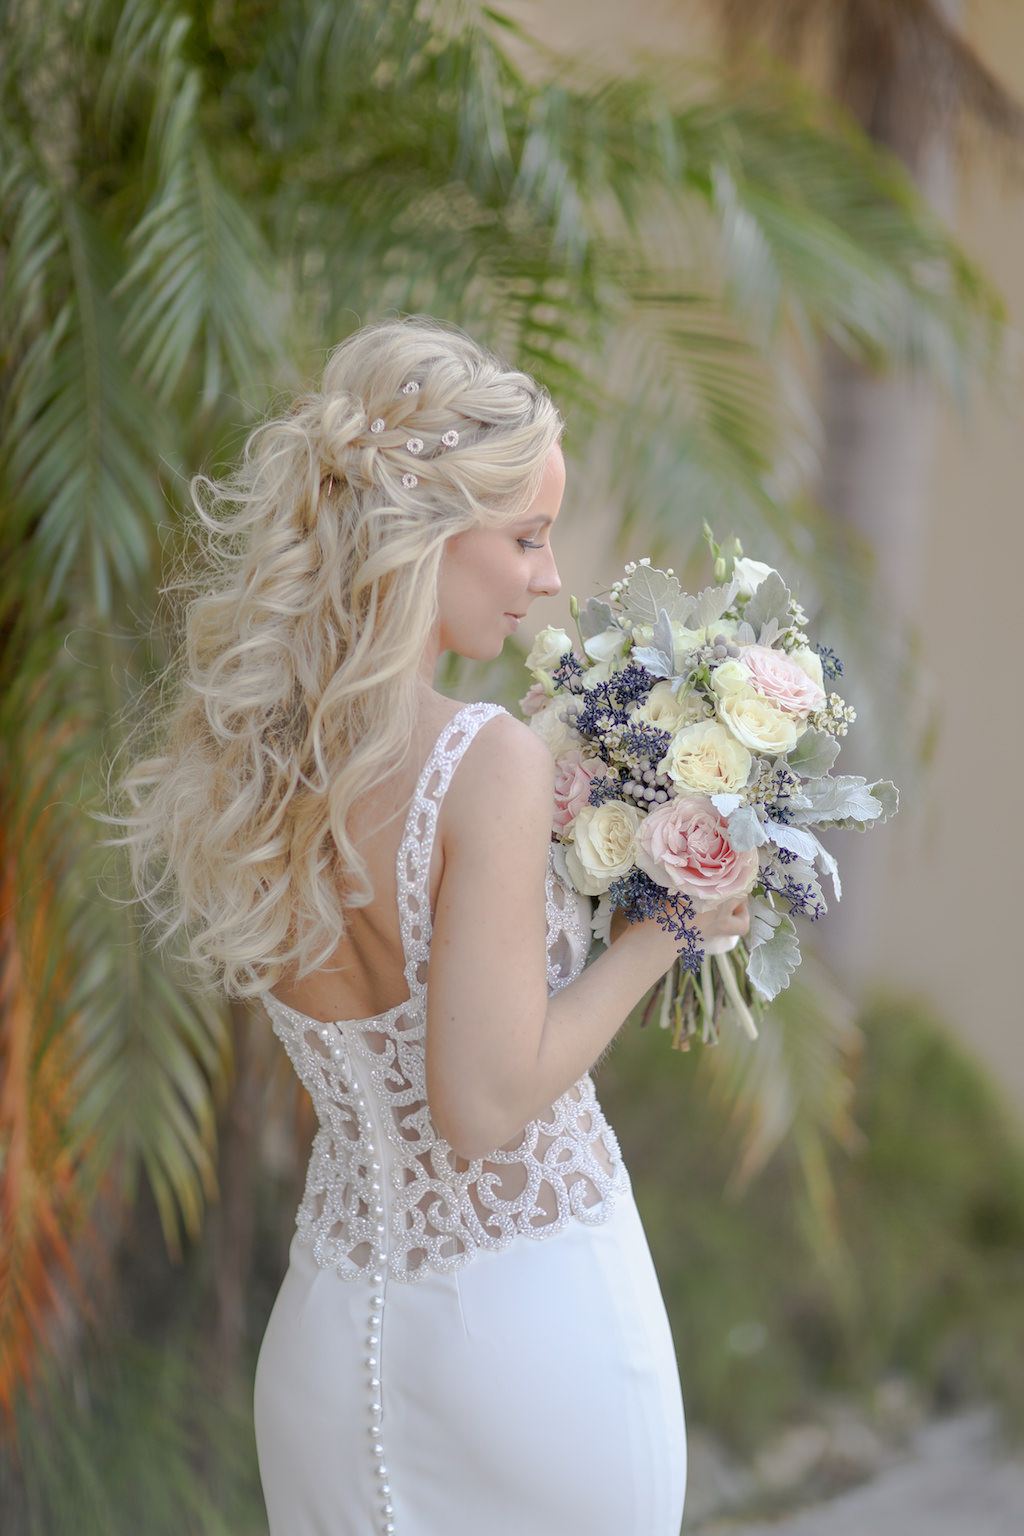 Outdoor Bridal Portrait in Lace Illusion Back Wedding Dress with BLush Pink, White Rose and Blue Berry Greenery Bouquet | Tampa Bay Photographer Lifelong Photography Studio